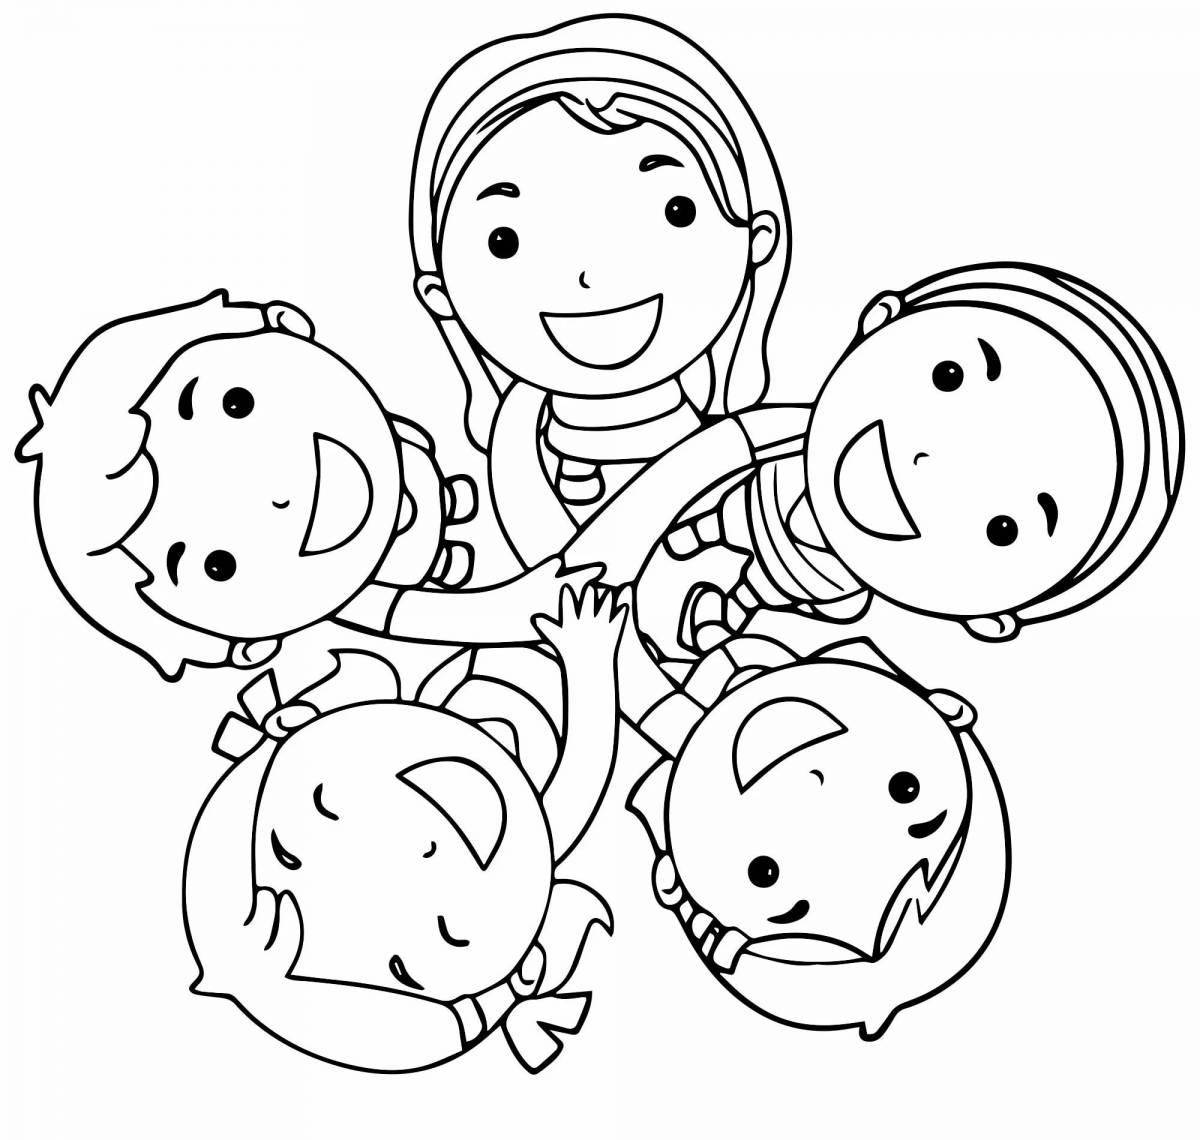 Soulful friendship coloring book for preschoolers